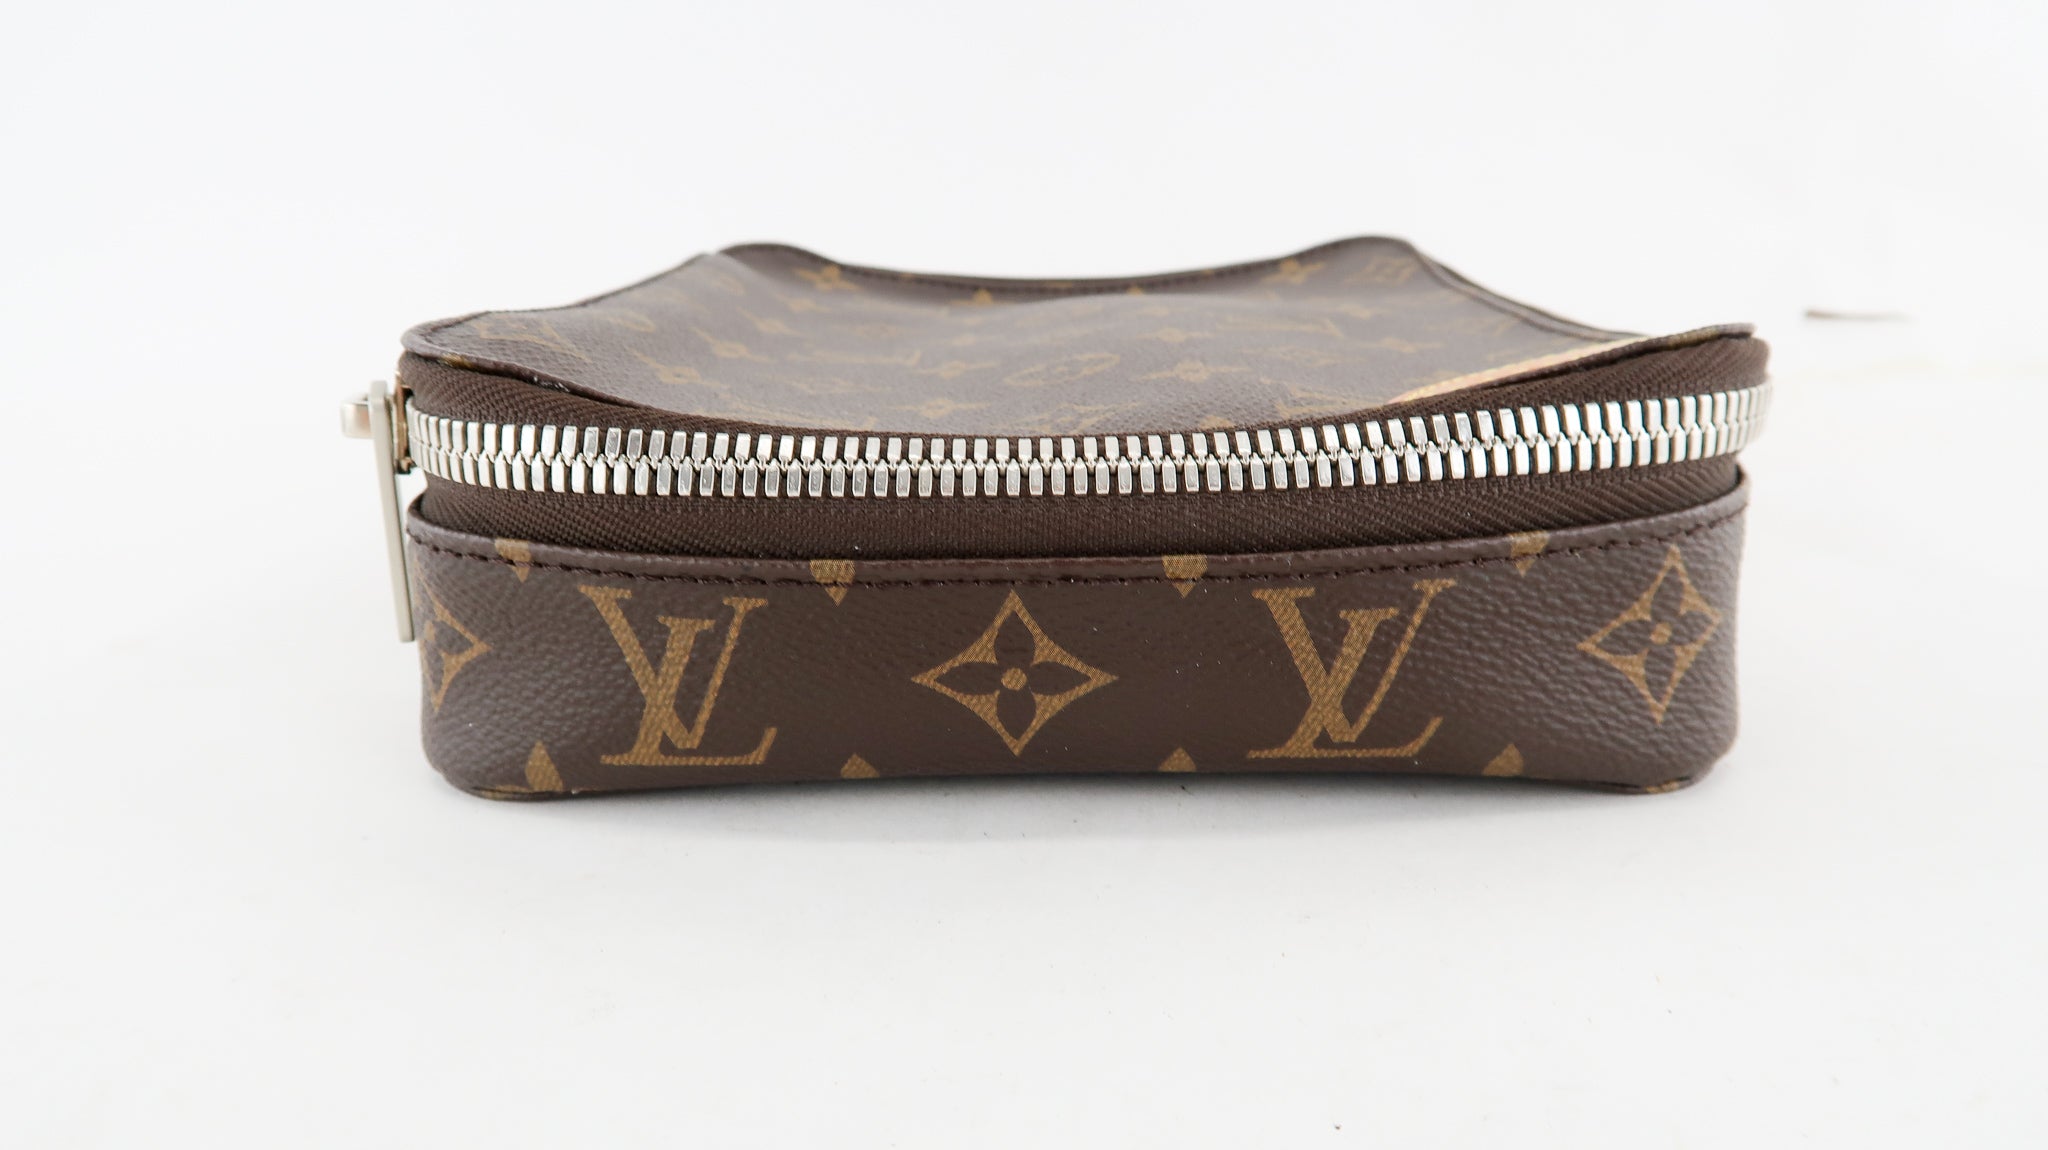 LOUIS VUITTON SMALL PACKING CUBE